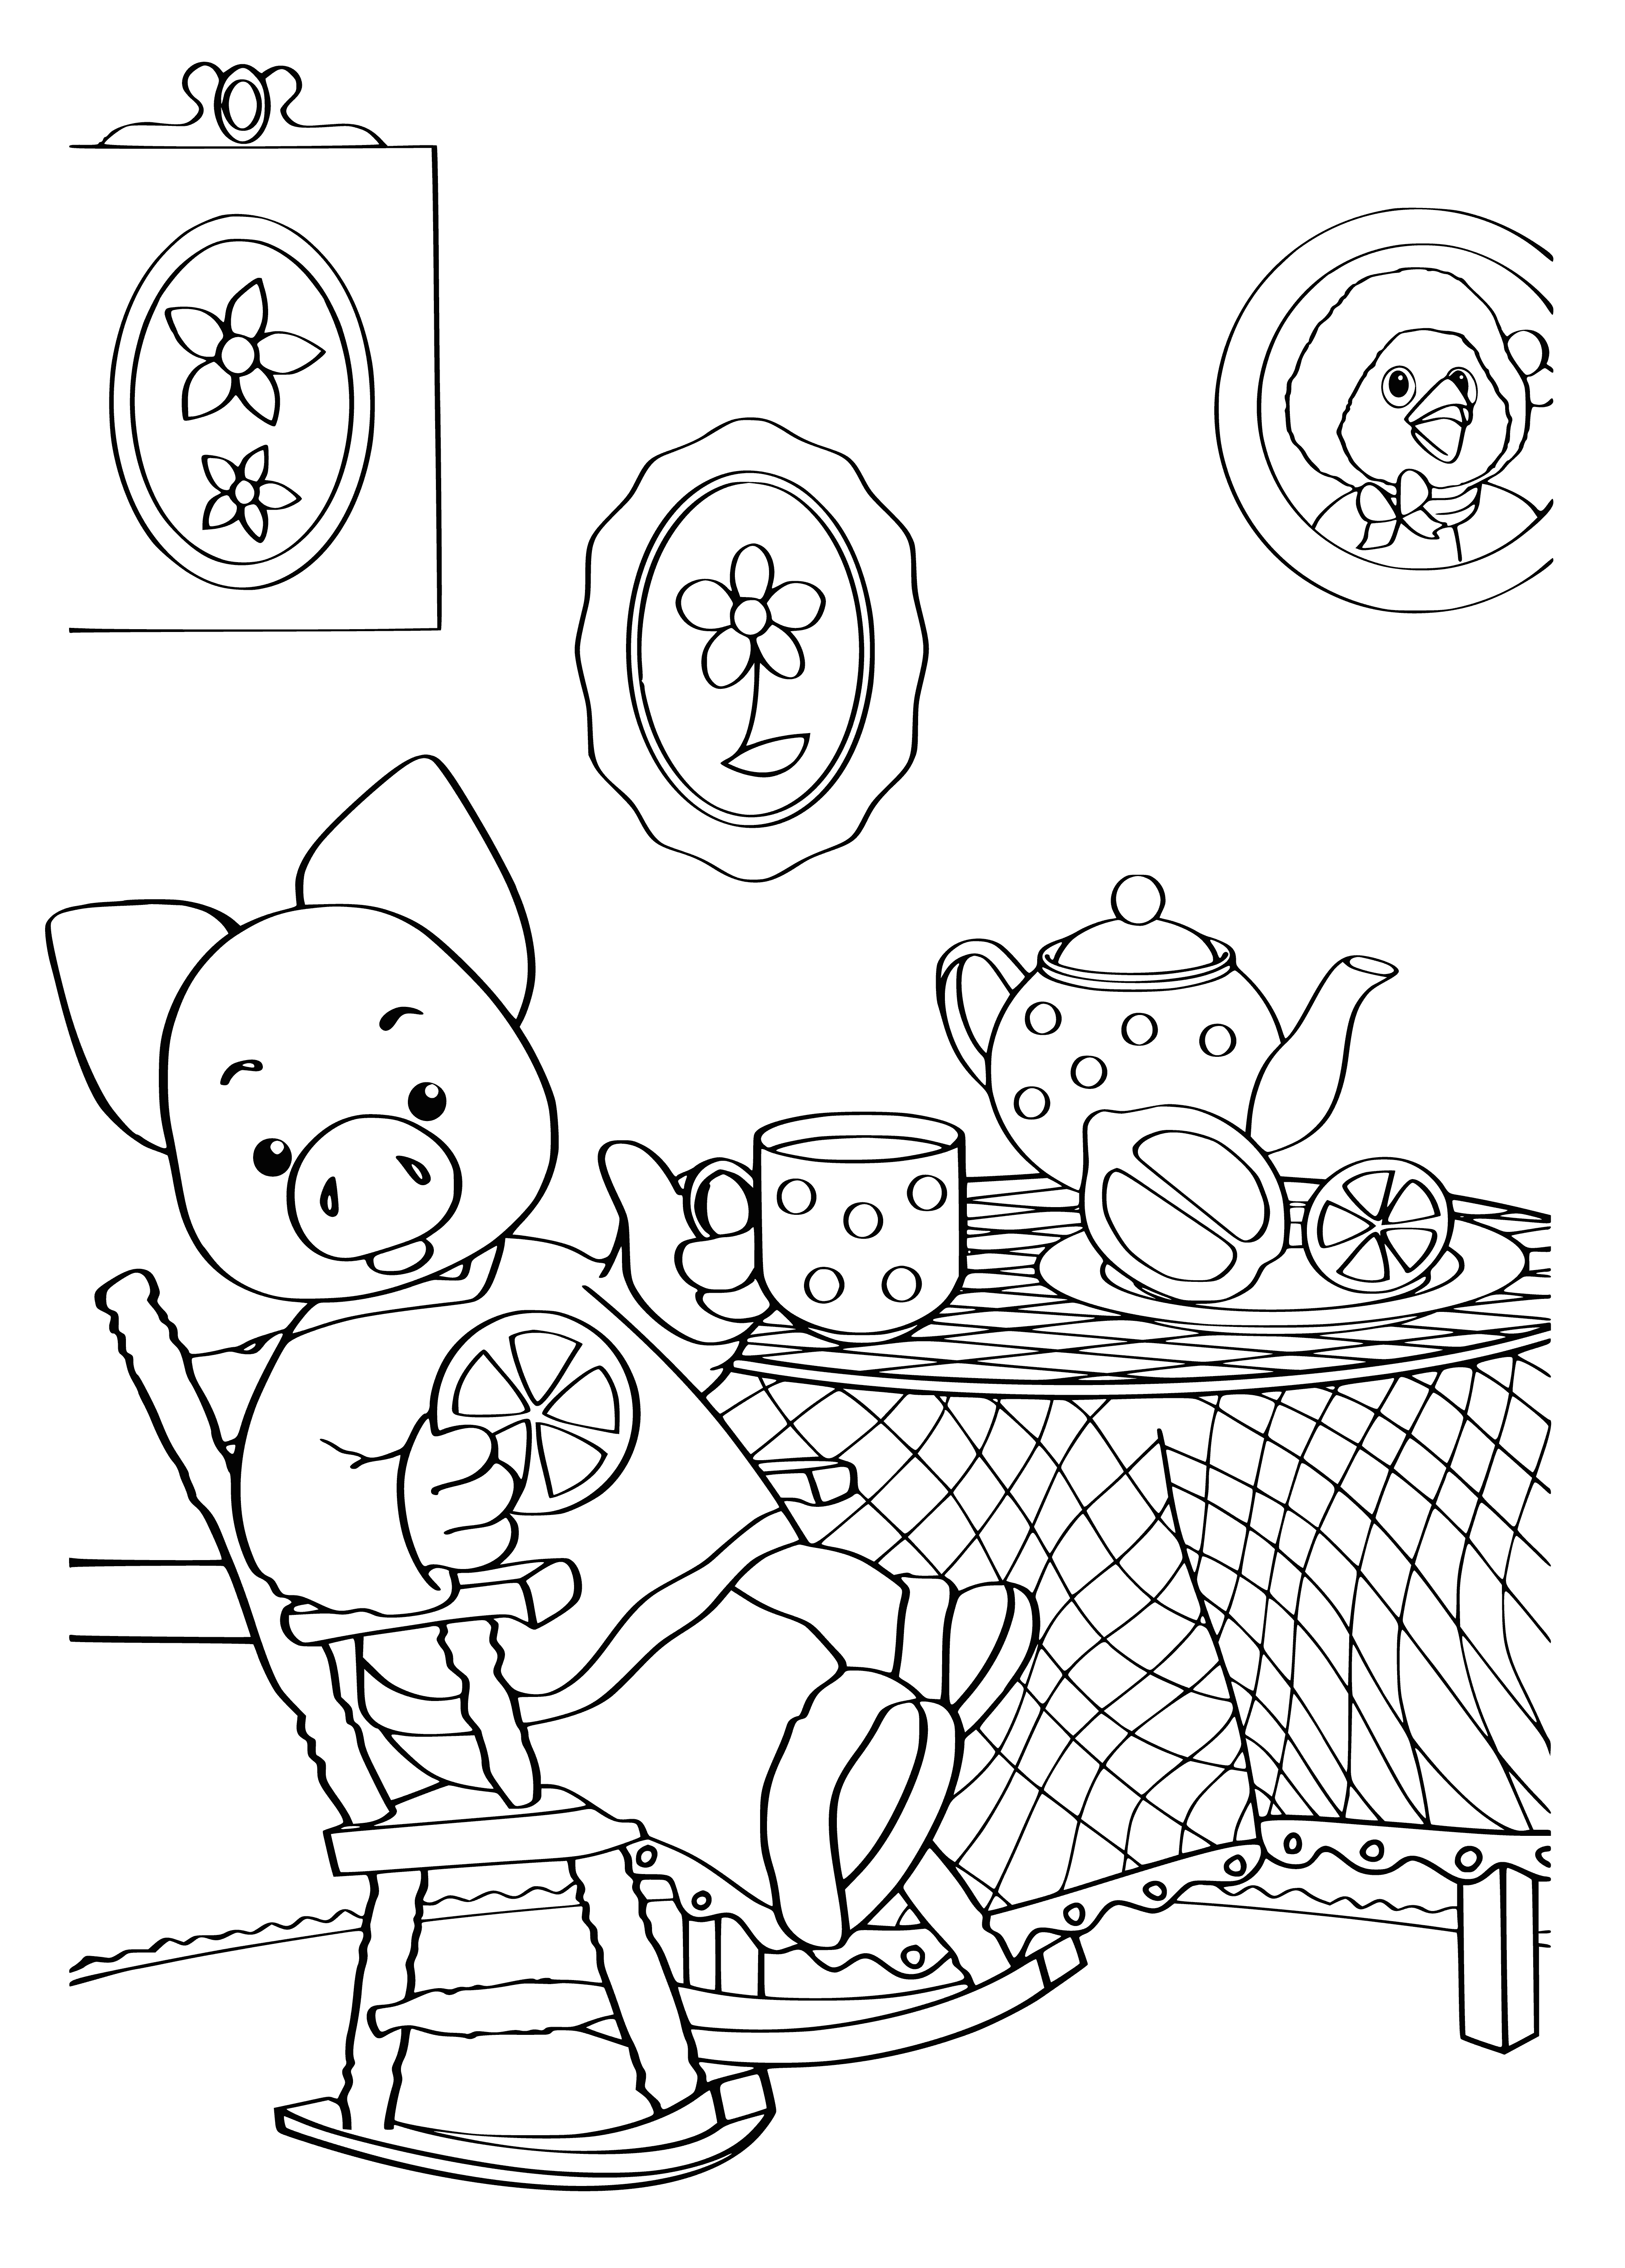 coloring page: Piggy from "Winnie the Pooh" says "Good night, children!" in this coloring page.